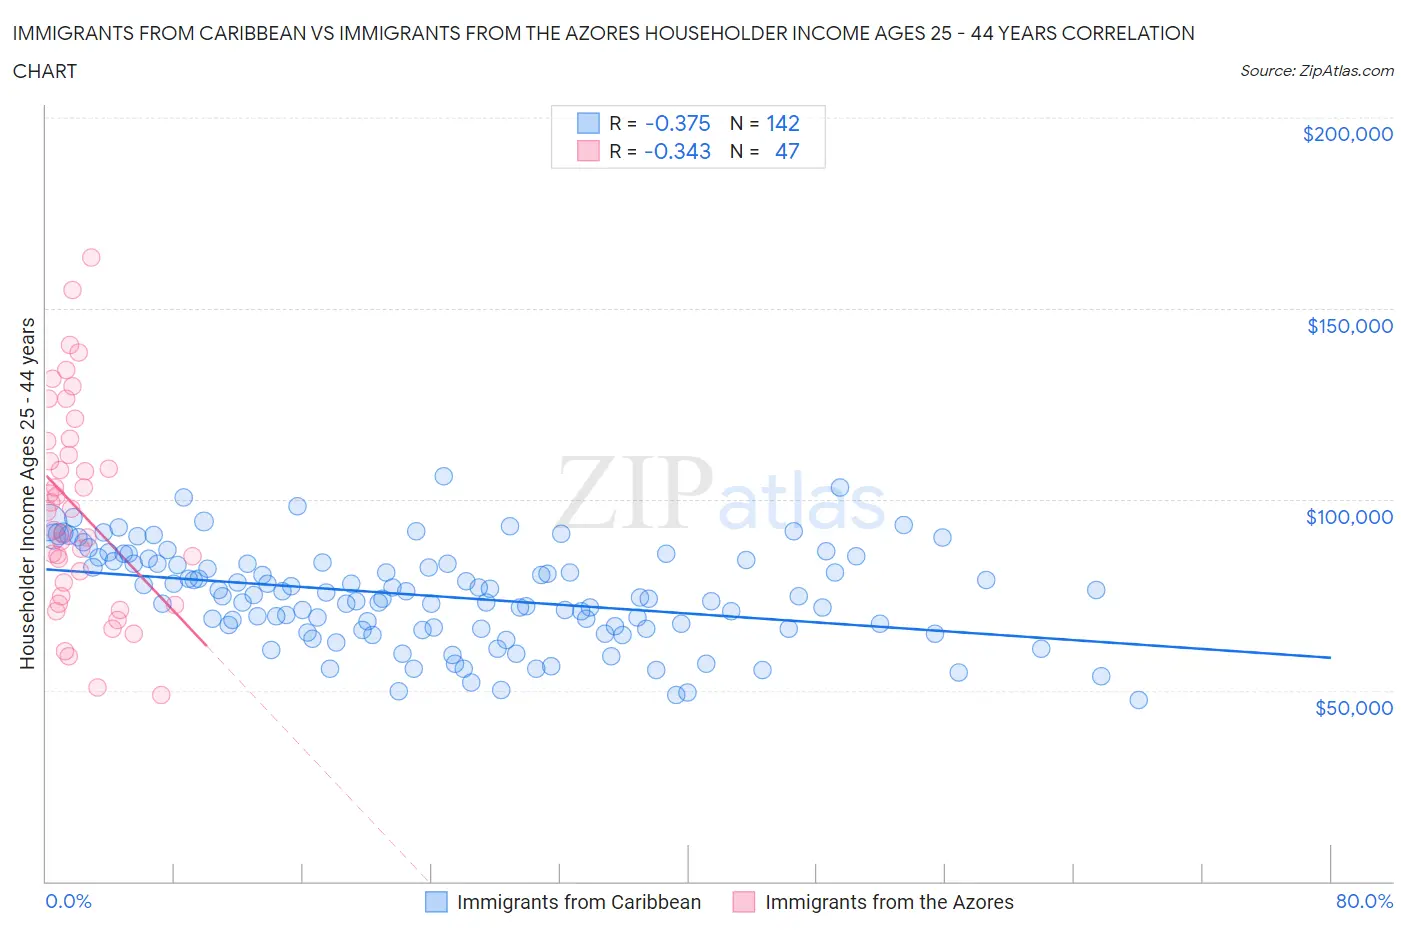 Immigrants from Caribbean vs Immigrants from the Azores Householder Income Ages 25 - 44 years